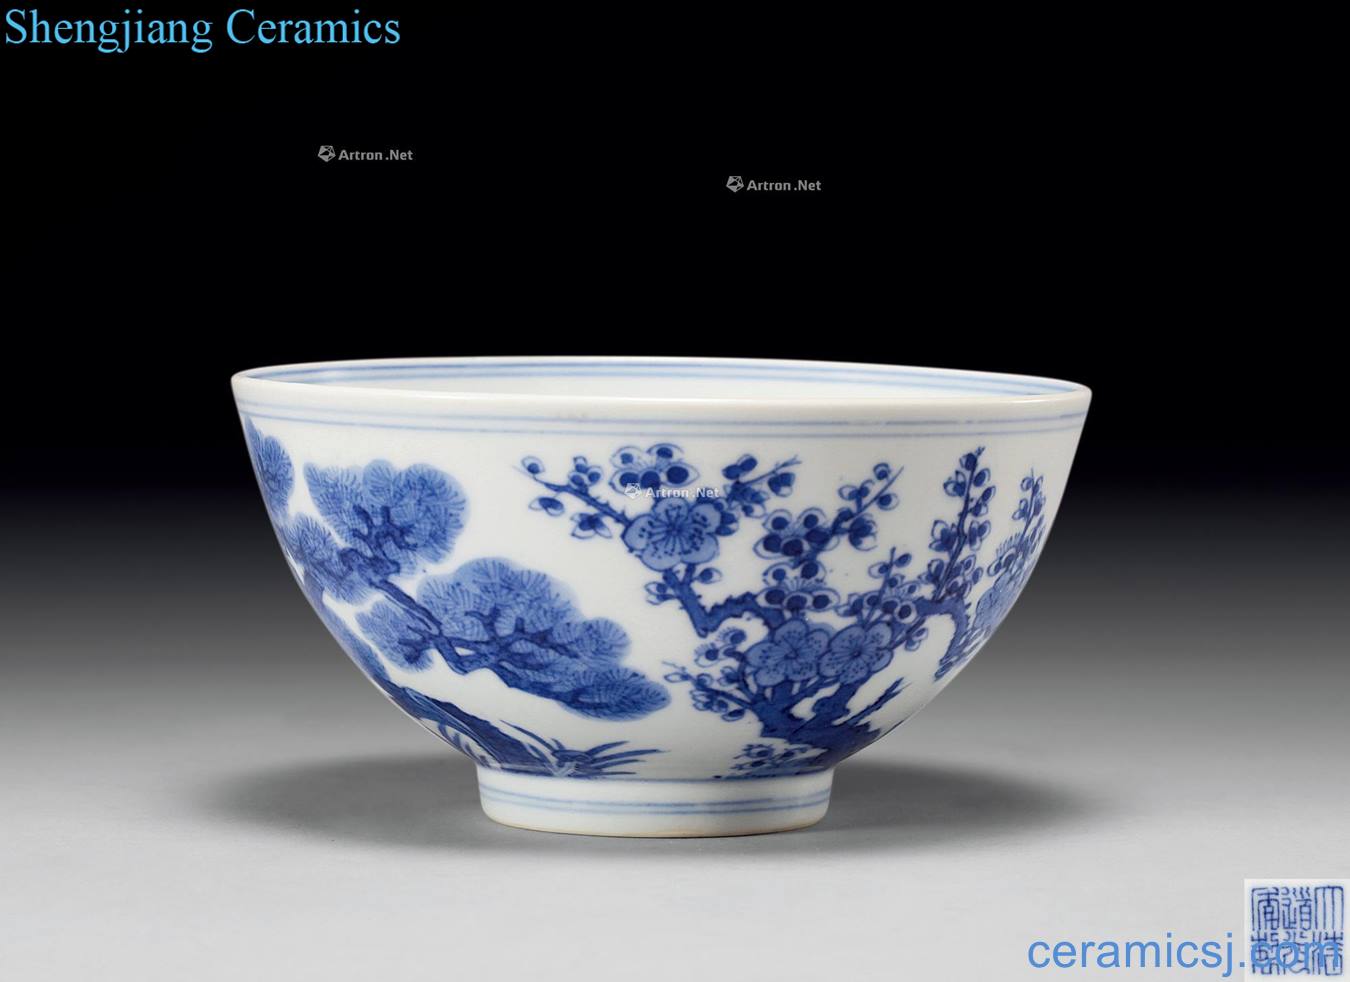 Qing daoguang Blue and white, poetic bowl